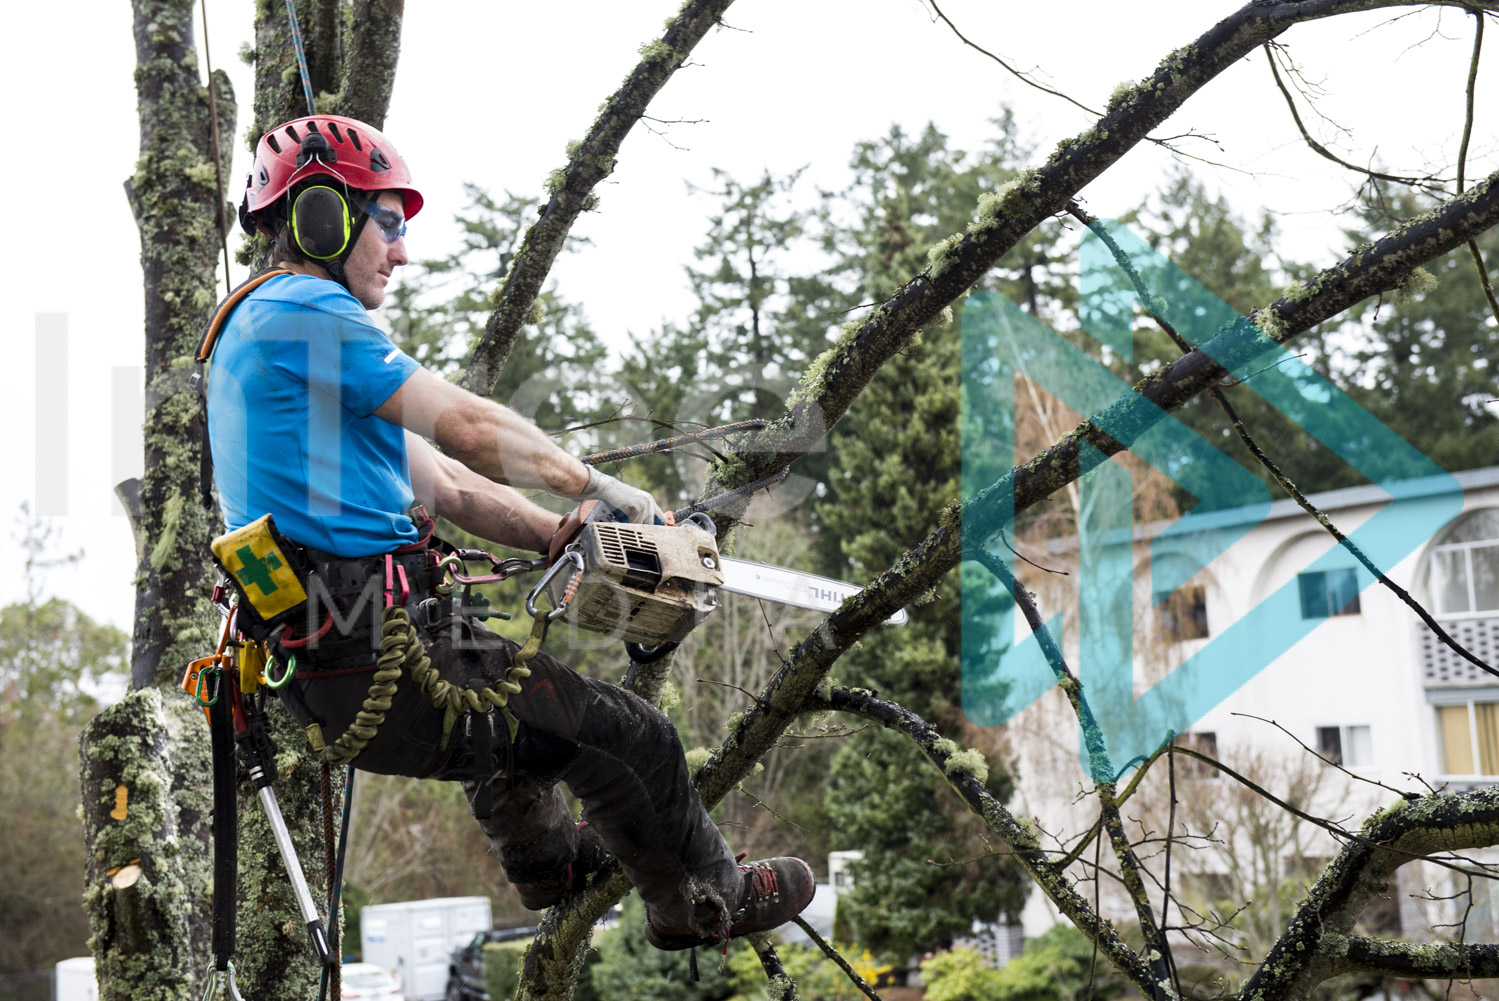 Male arborist on rope in tree cutting branch with chainsaw InTree arborist image 001-21-5630